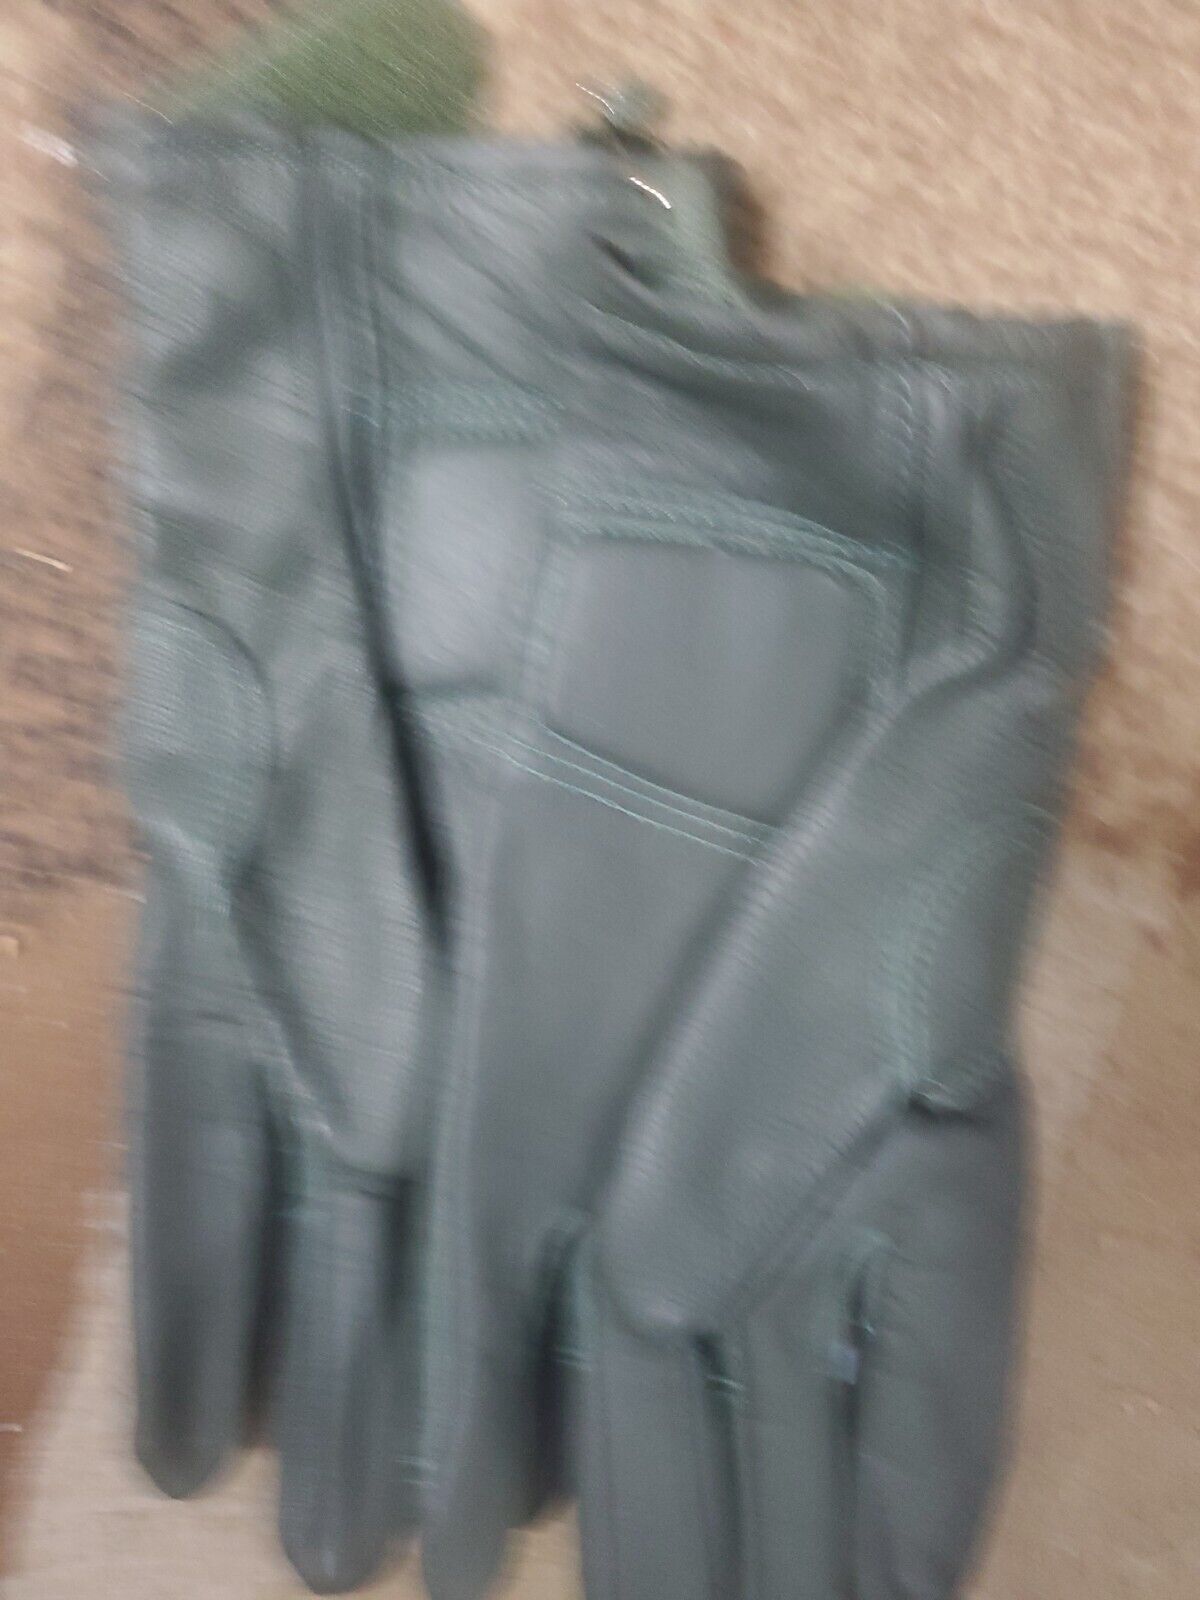 HWI Gear Army Combat Gloves NSN 8415-01-601-8  small excellent shape 